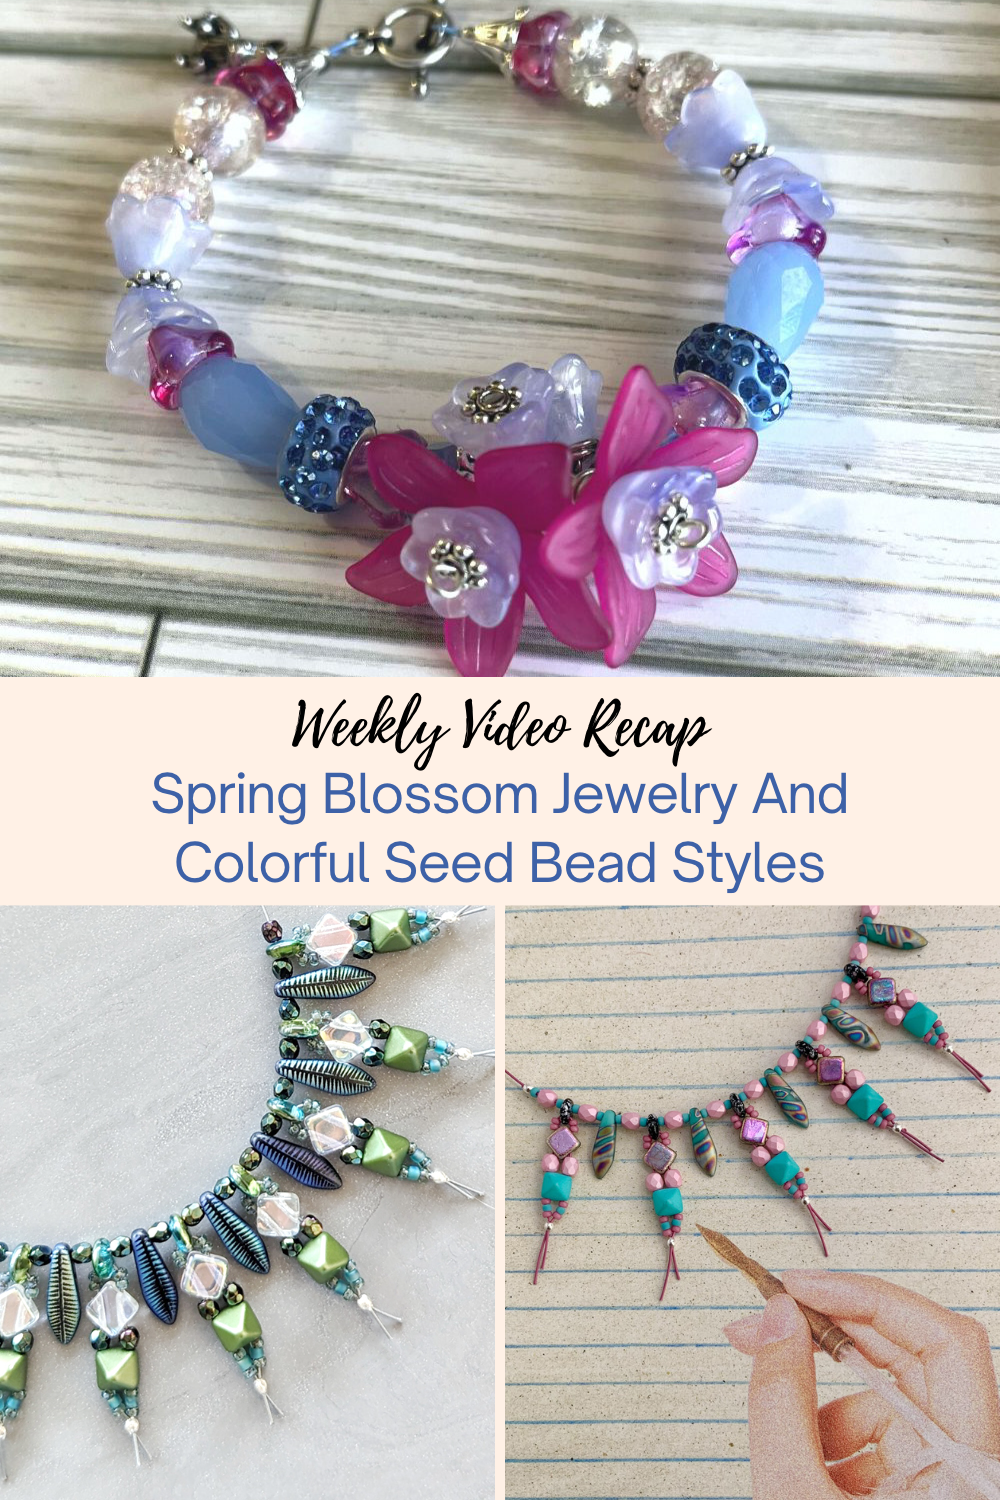 Spring Blossom Jewelry And Colorful Seed Bead Styles Collage